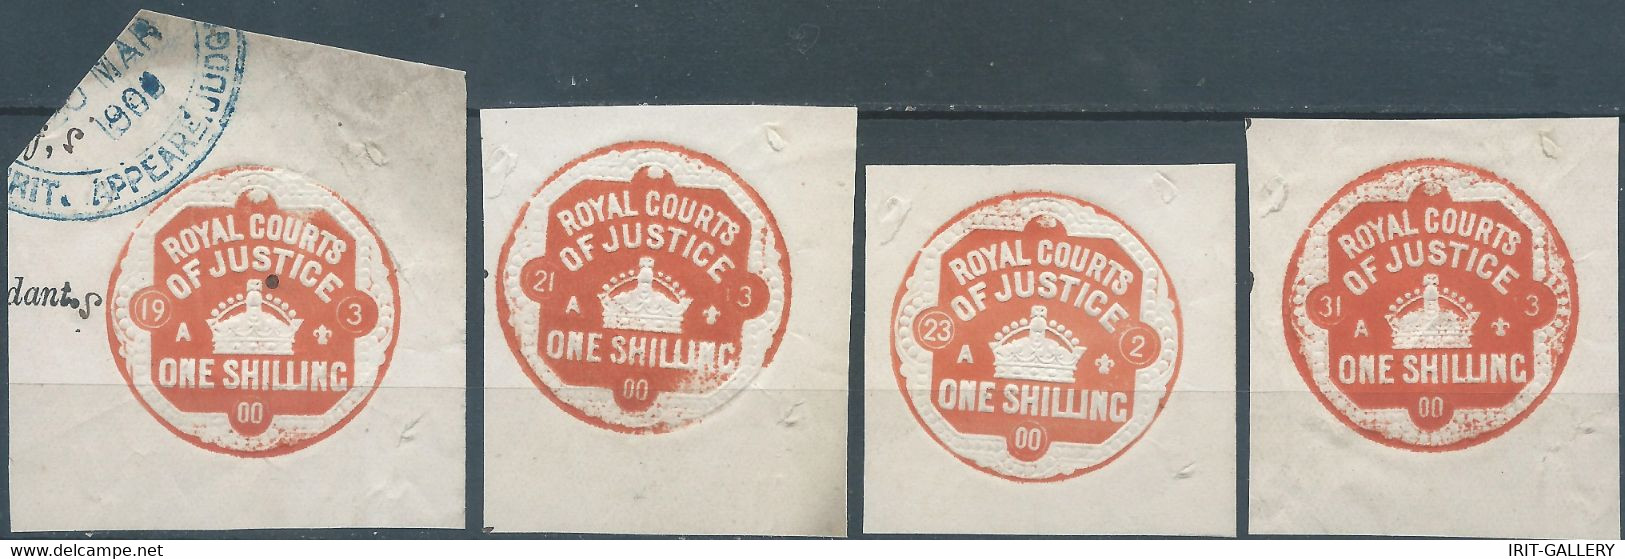 Great Britain-ENGLAND,1900 ,ROYAL COURTS OF JUSTICE, Tax Fee,Different Date Of The Day Of The Month,1 SHILLING - Fiscali